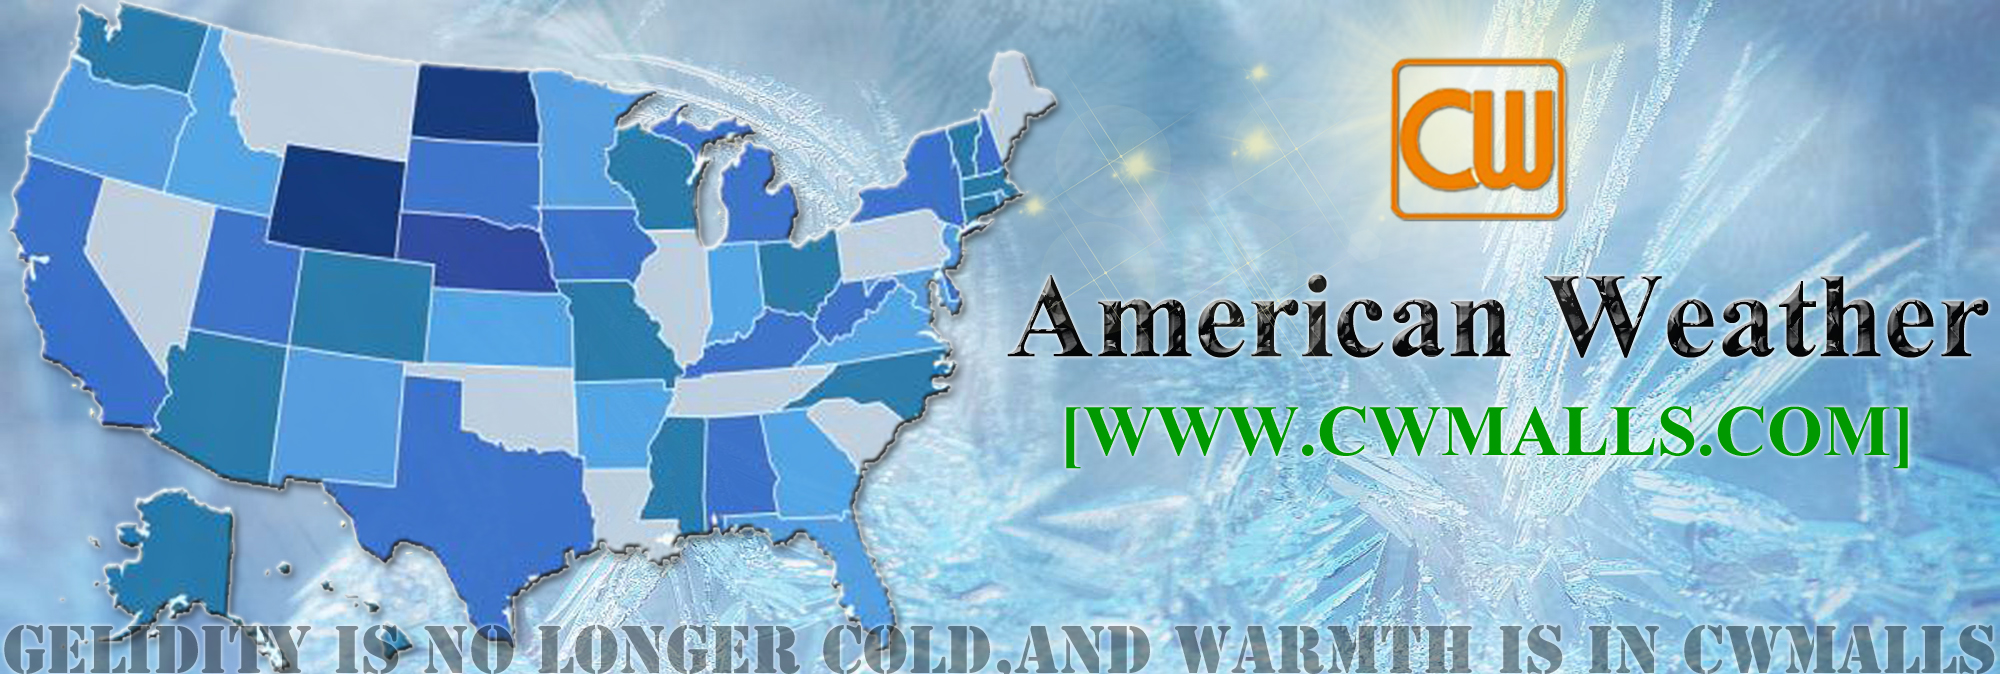 CWMALLS American Weather